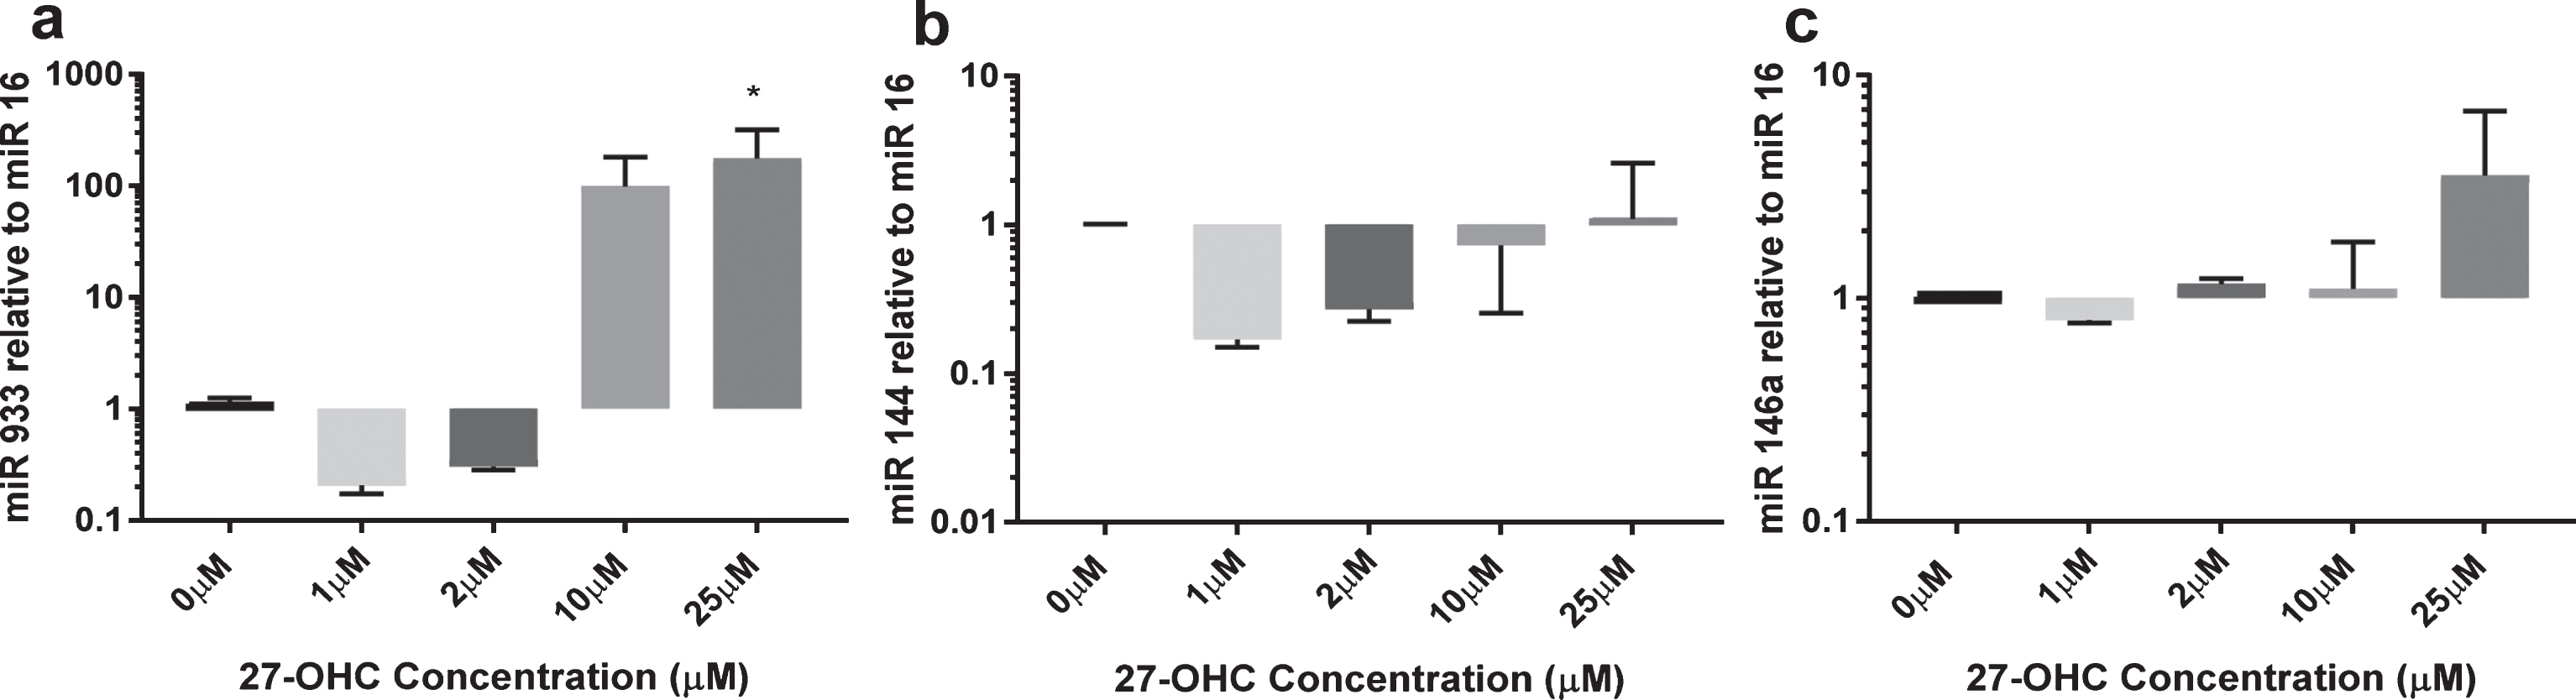 Expression of miR 144, miR 146a, and miR 933 in response to 27-OHC. HMVEC cells (1×106) were treated with 10μM or 25μM 27-OHC for 24 h. Total micro RNA was extracted as described. miR levels were quantified by qRT-PCR relative to miR16. *p < 0.05, n = 3.